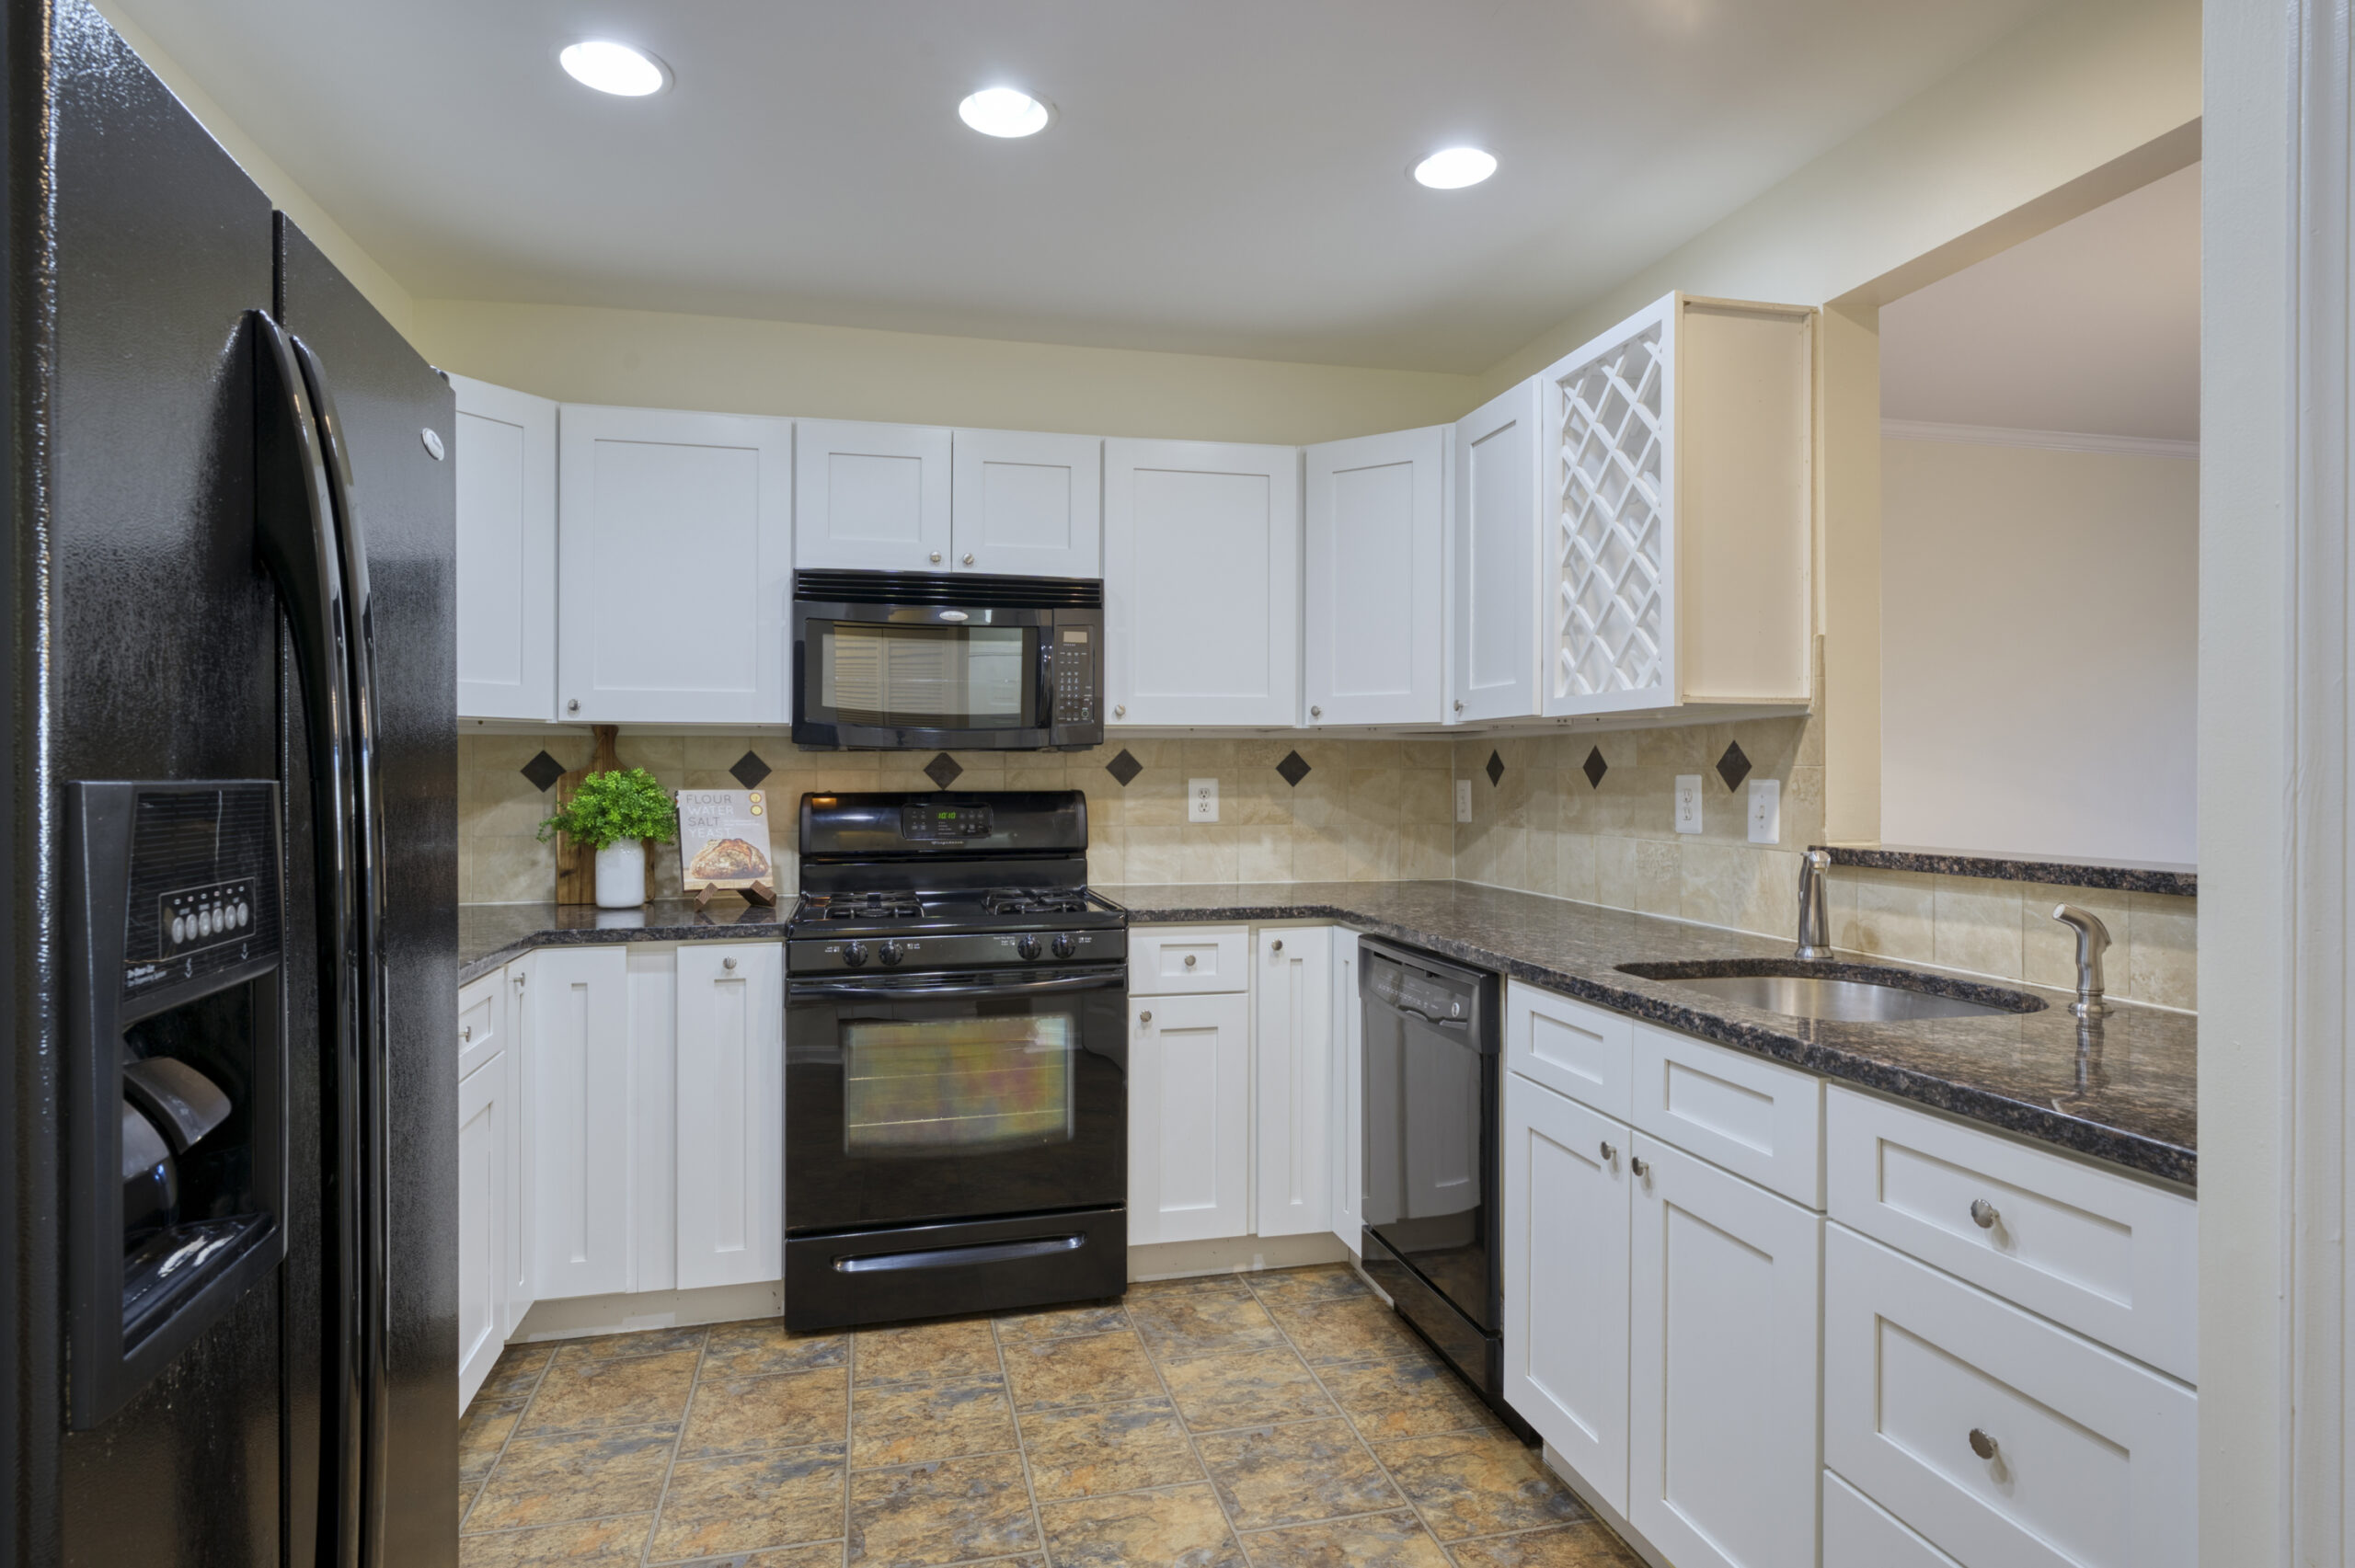 Professional interior photo of 20588 Cornstalk Ter Unit 101 - Showing the kitchen with black appliances, white cabinets, a picture window to the living room and black granite counters